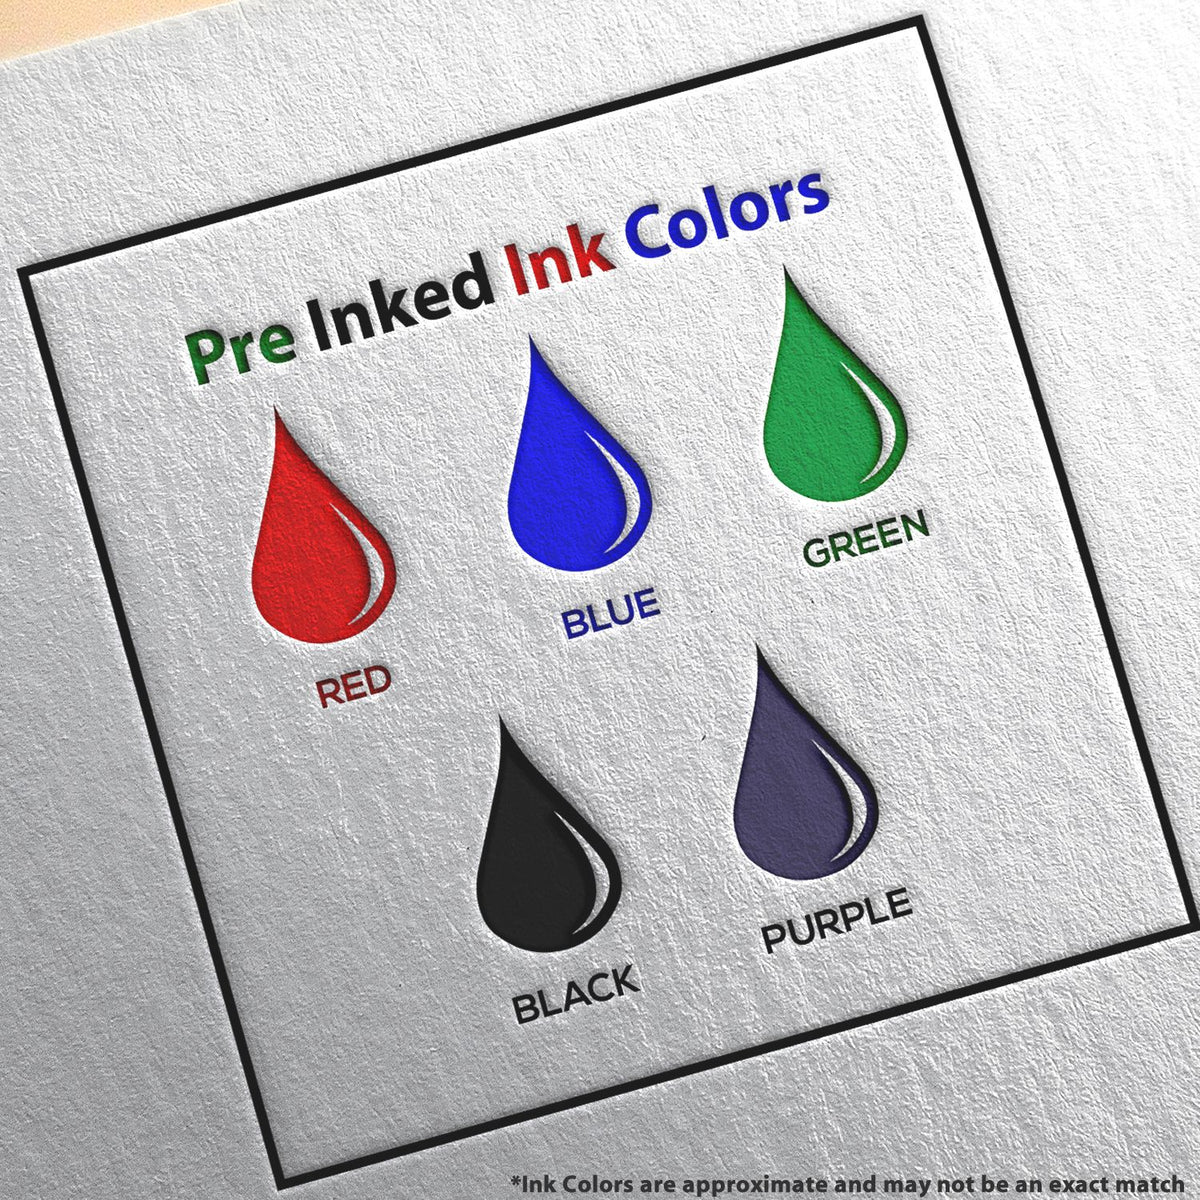 A picture showing the different ink colors or hues available for the Slim Pre-Inked Rectangular Notary Stamp for Wyoming product.